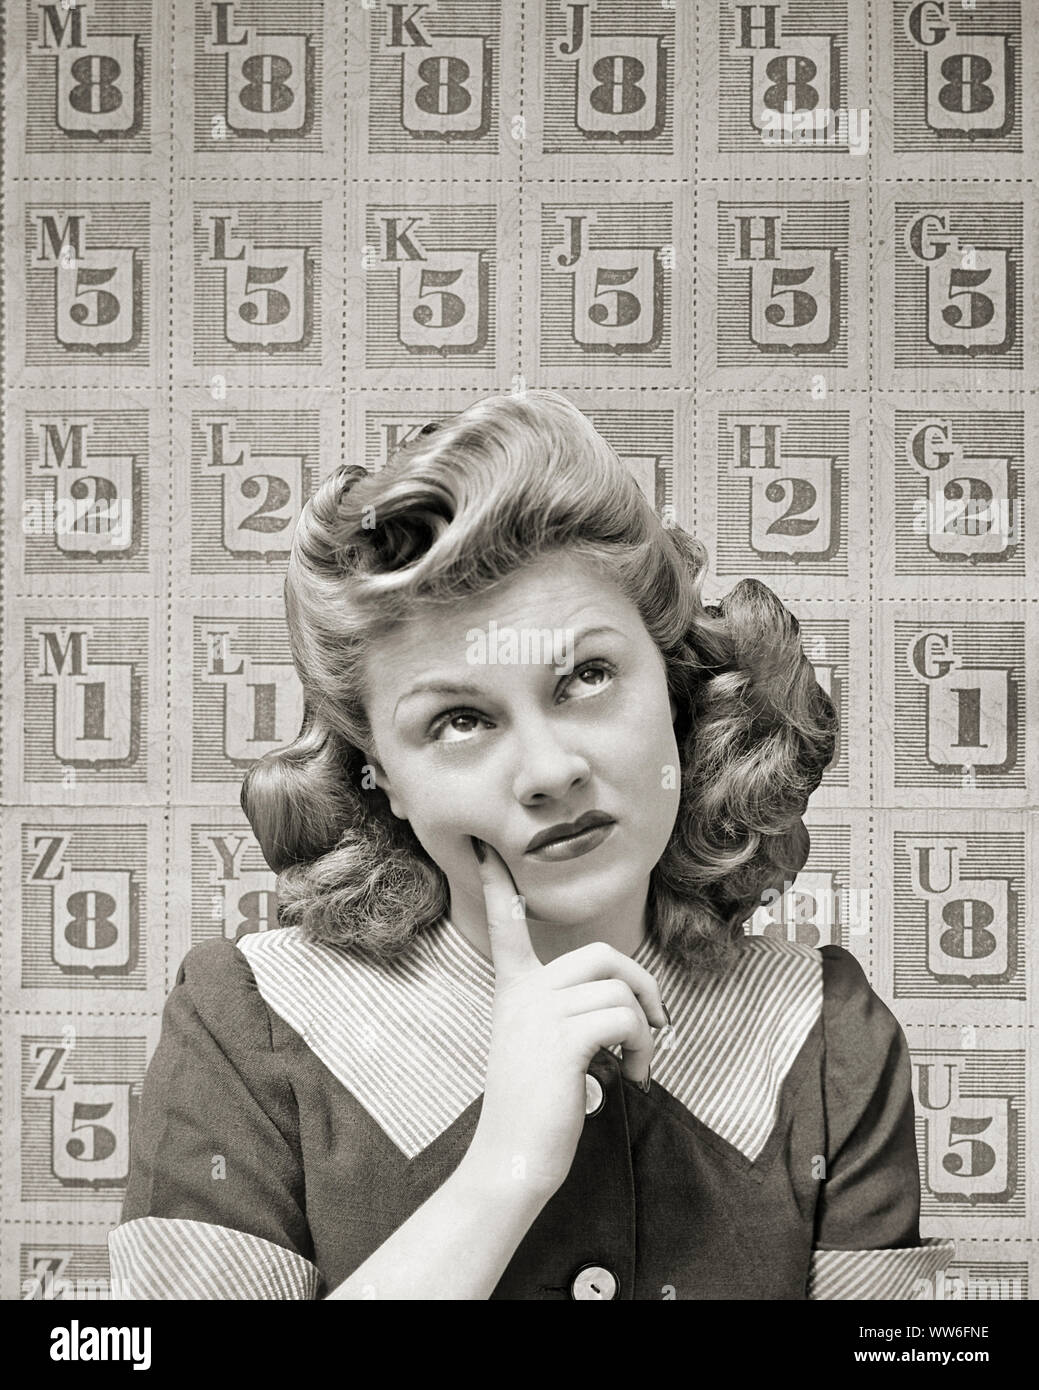 1940s WONDERING THINKING WOMAN LOOKING UP WITH RATION STAMPS IN BACKGROUND WORLD WAR II - d4863 HAR001 HARS FOODS B&W PUZZLED GOALS HOMEMAKER HOMEMAKERS HOME FRONT PROTECTION STRATEGY CHOICE WORLD WARS WORLD WAR WORLD WAR TWO WORLD WAR II UP AUTHORITY HOUSEWIVES STAMPS WAR EFFORT 1943 RATION VICTORY ROLLS RATIONING STYLISH SUPPORT WORLD WAR 2 COOPERATION LOOKING UP WONDERING YOUNG ADULT WOMAN BLACK AND WHITE CAUCASIAN ETHNICITY HAR001 OLD FASHIONED Stock Photo